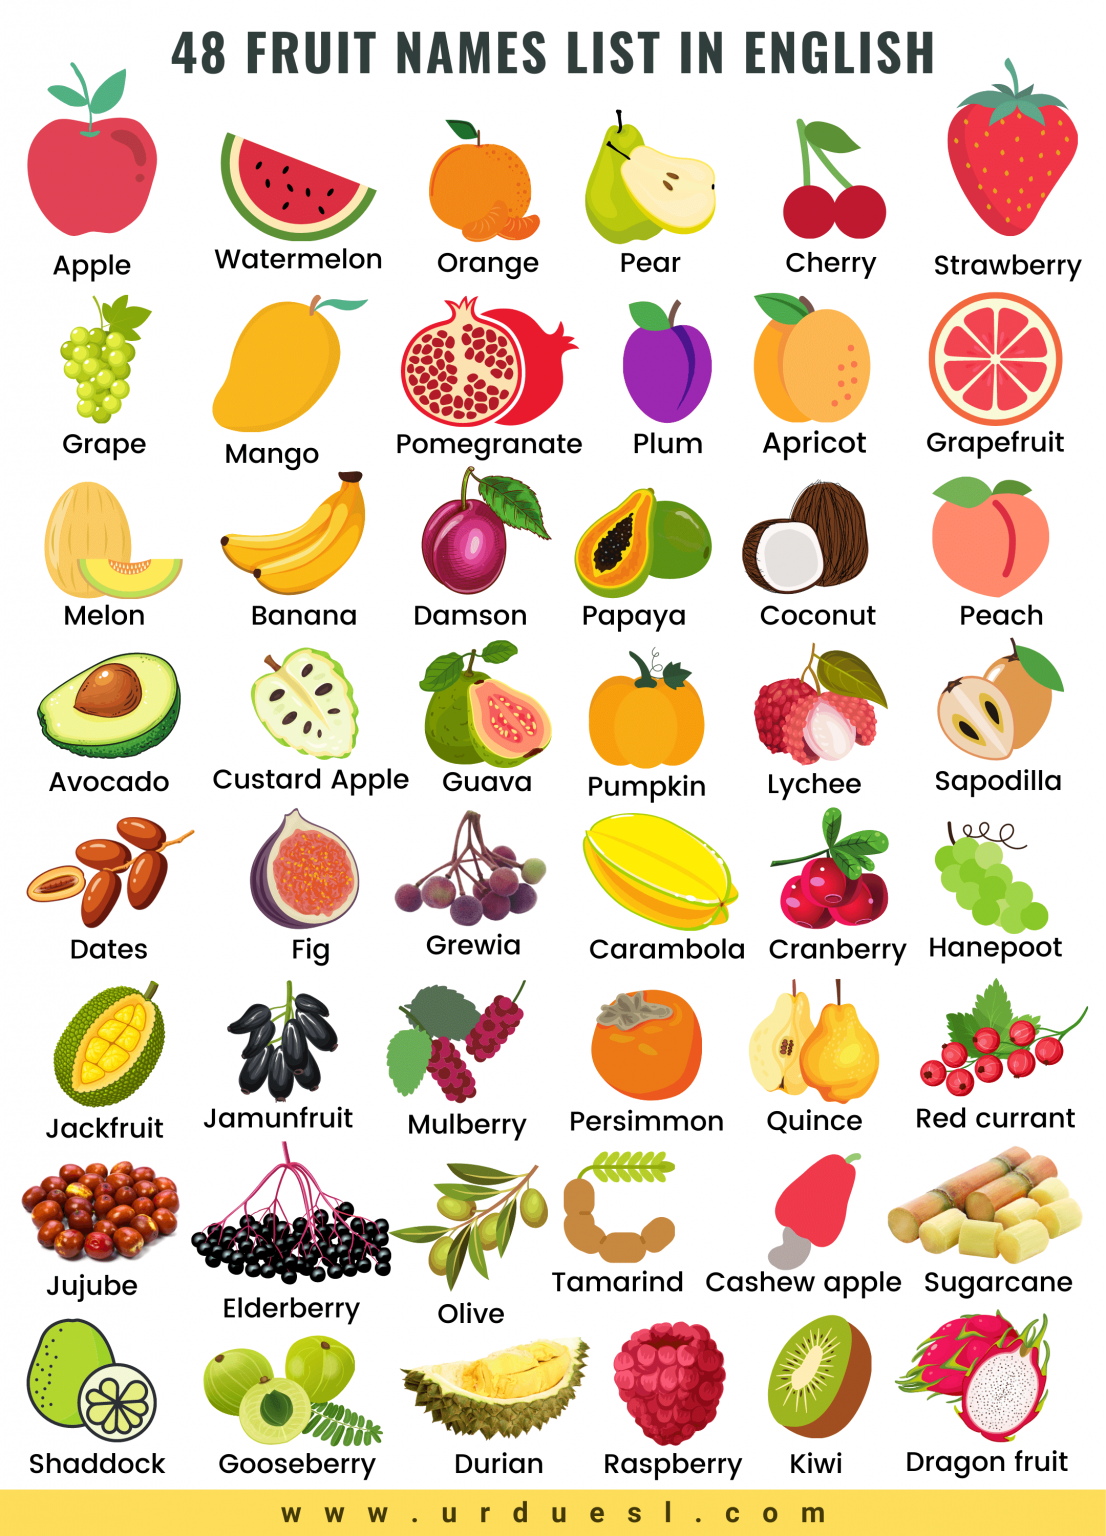 english-fruits-names-list-definition-and-examples-fruits-vocabulary-if-we-briefly-define-the